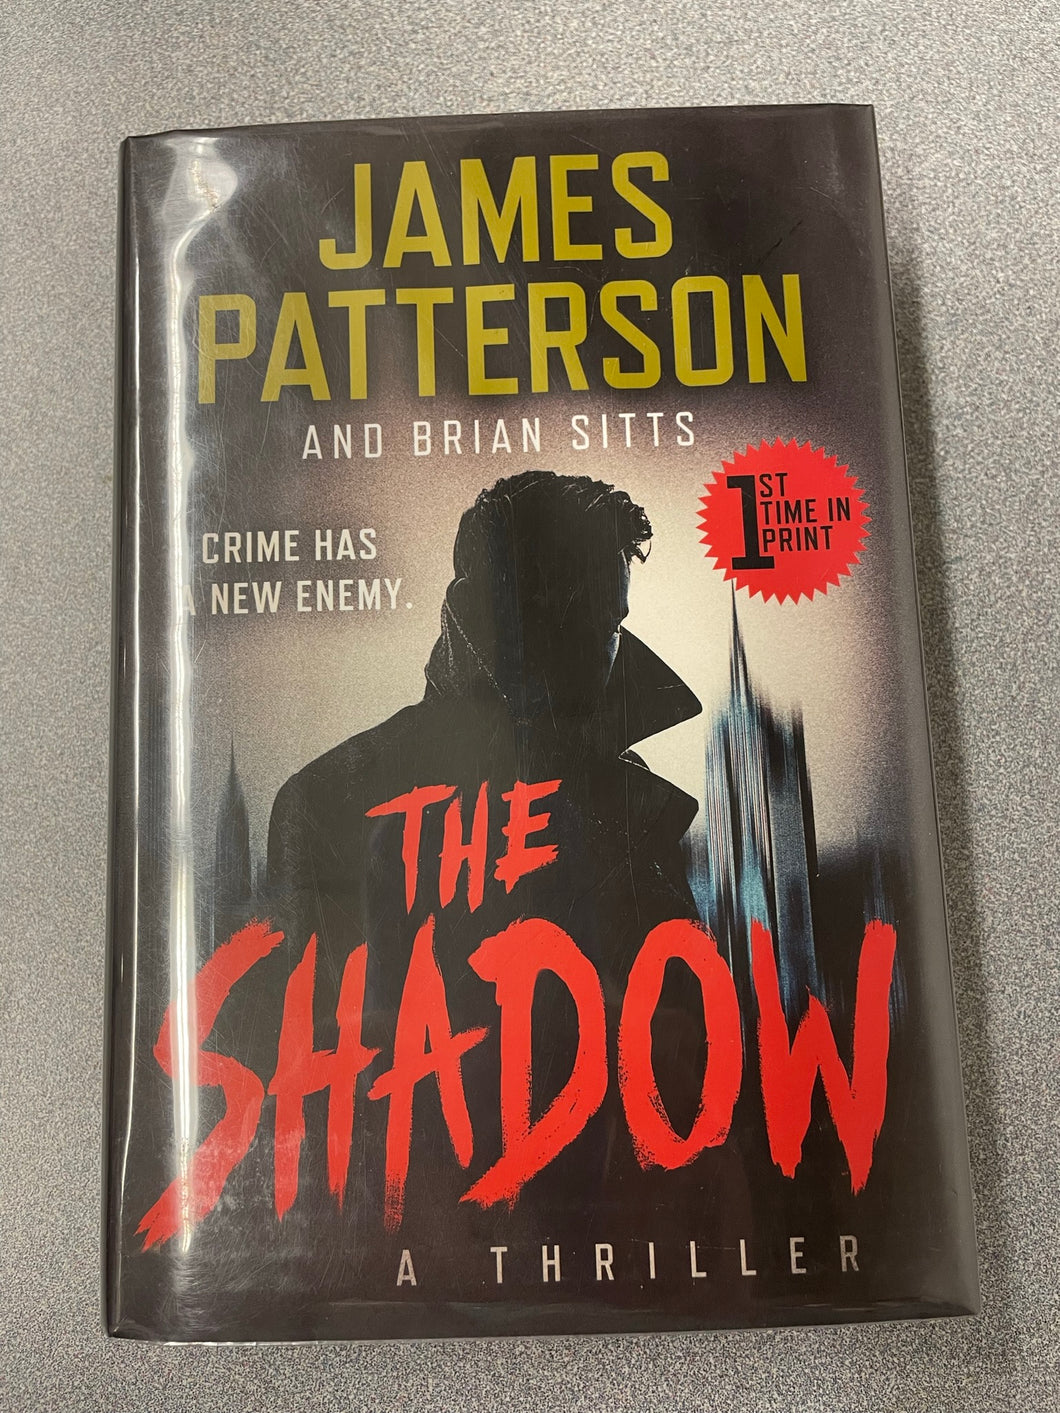 Patterson, James and Brian Sitts, The Shadow [2021] RBS 10/22